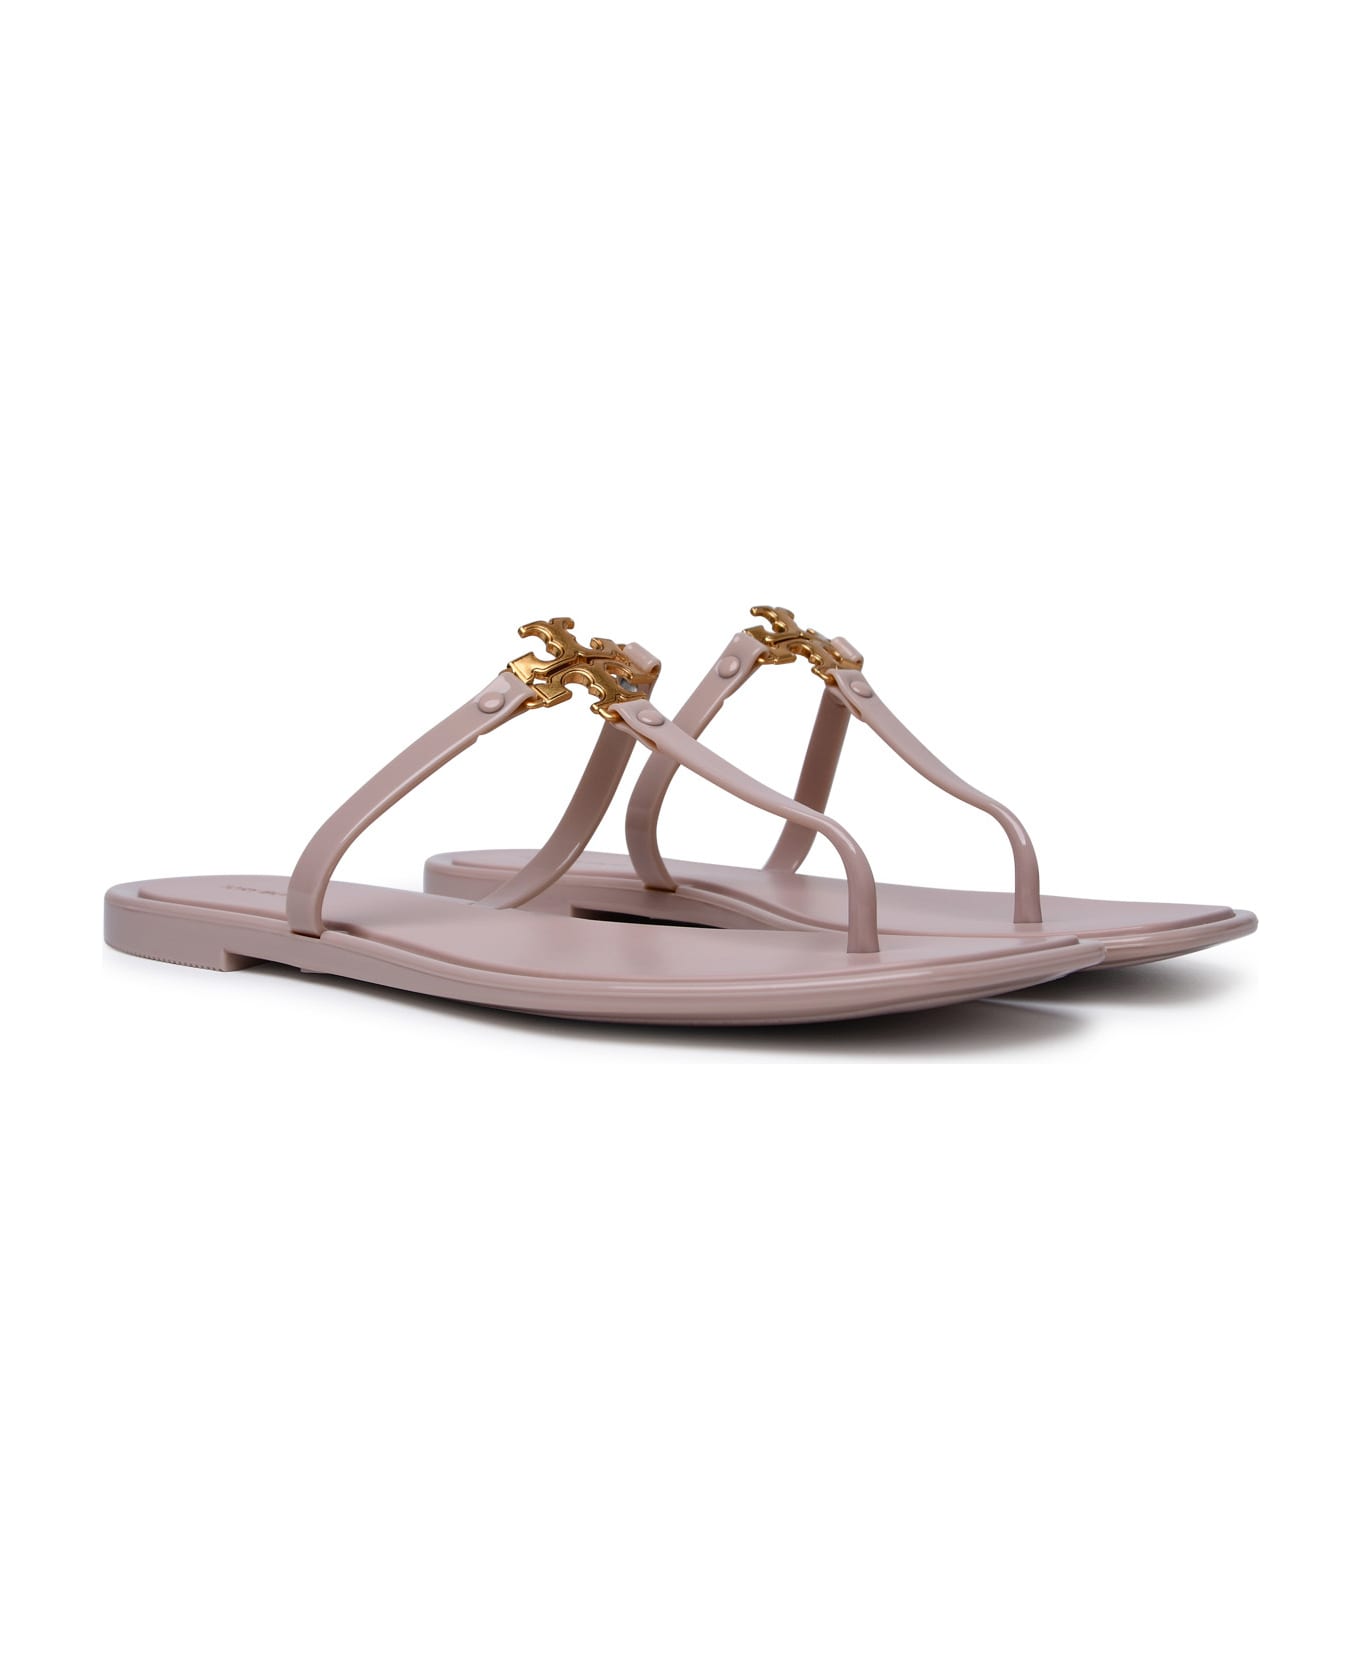 Tory Burch Roxanne Jelly Thong Sandals - Pink